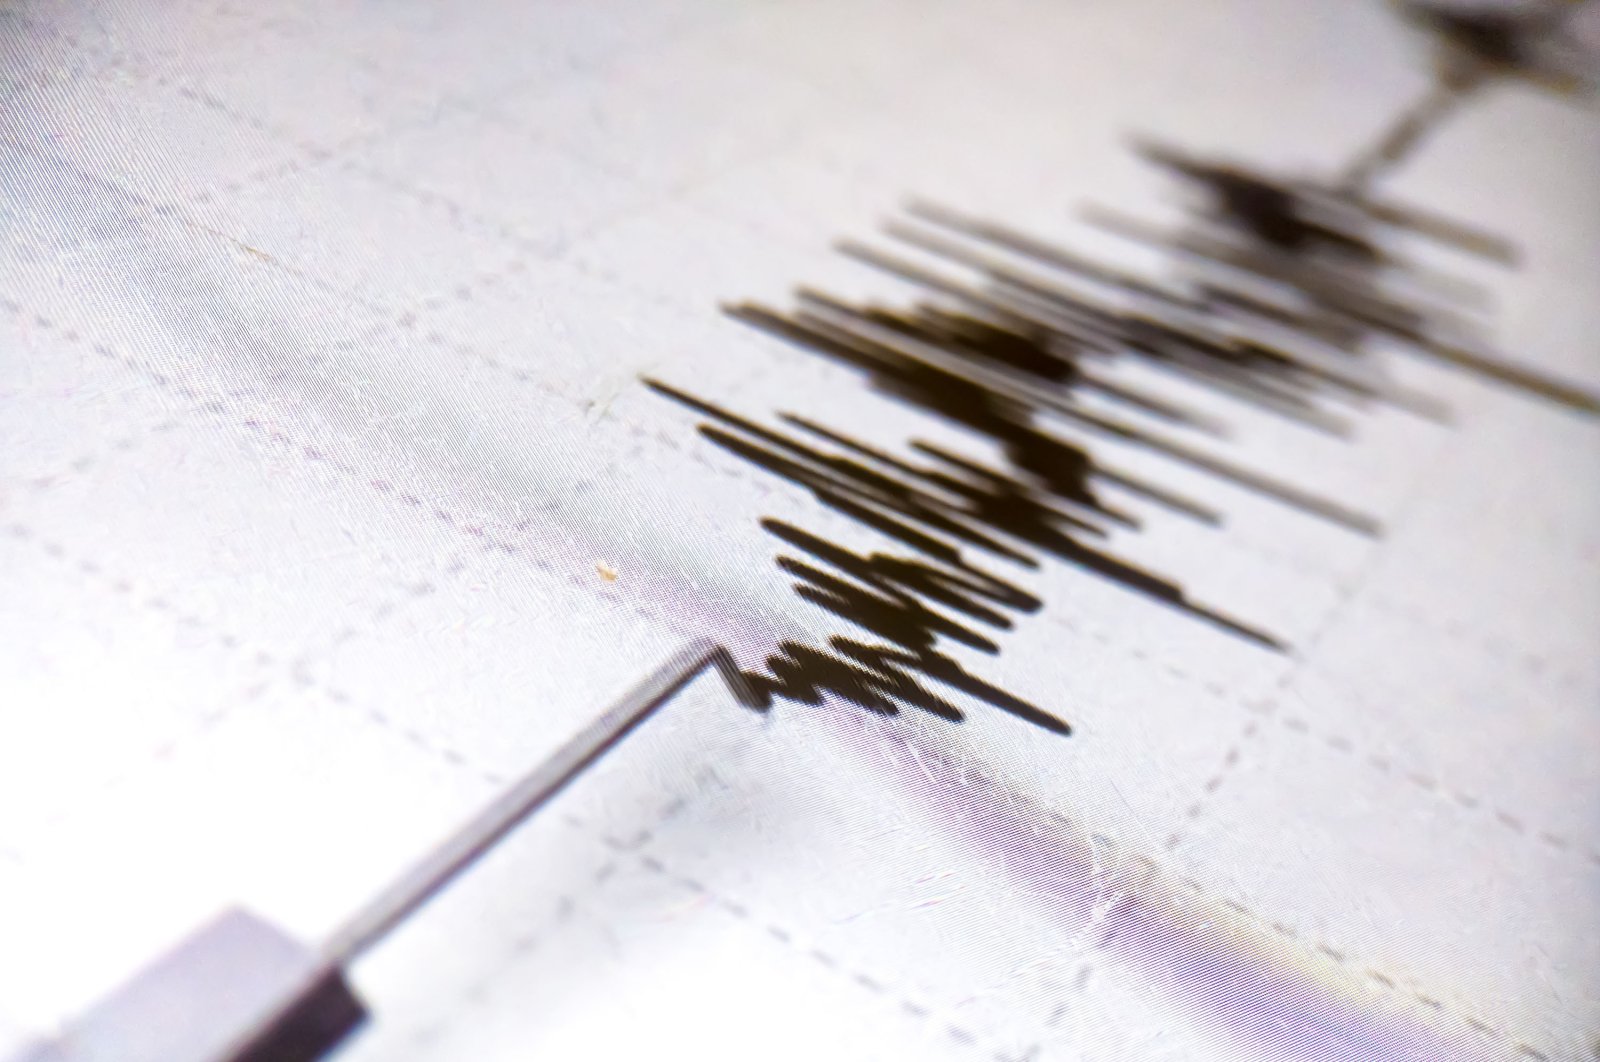 A seismometer printing line records earthquake tremors on white paper, Aceh, Indonesia. (Shutterstock Photo)